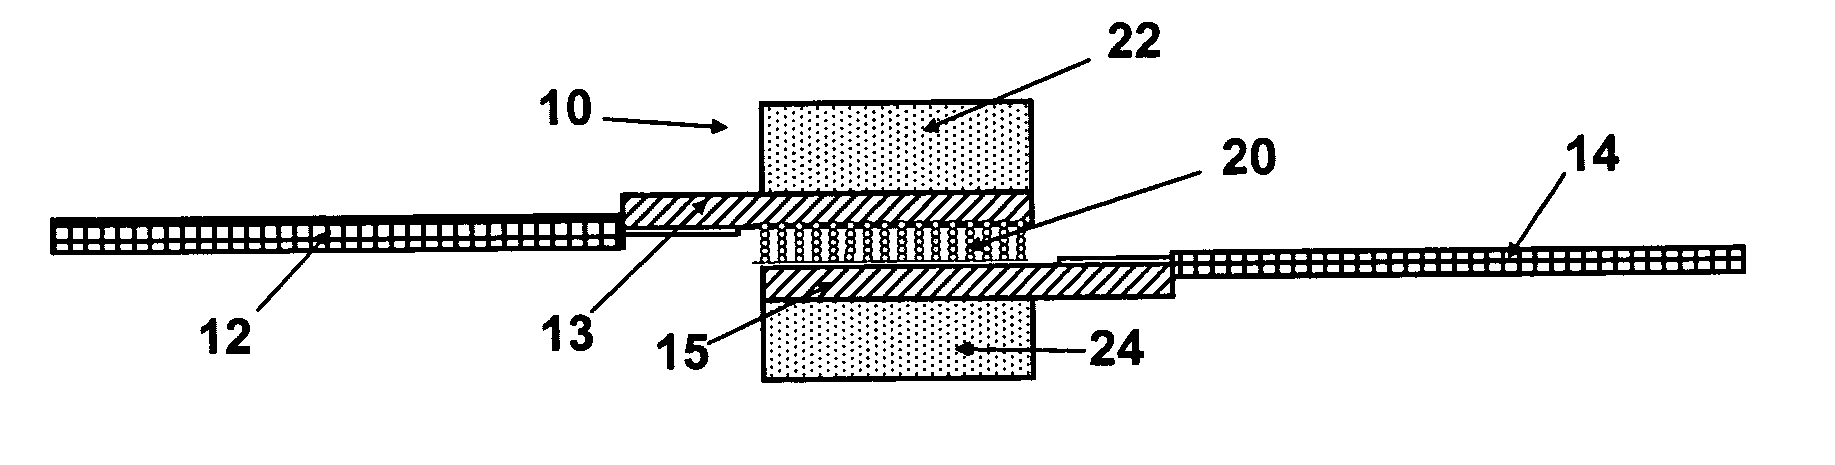 Cable connector incorporating anisotropically conductive elastomer